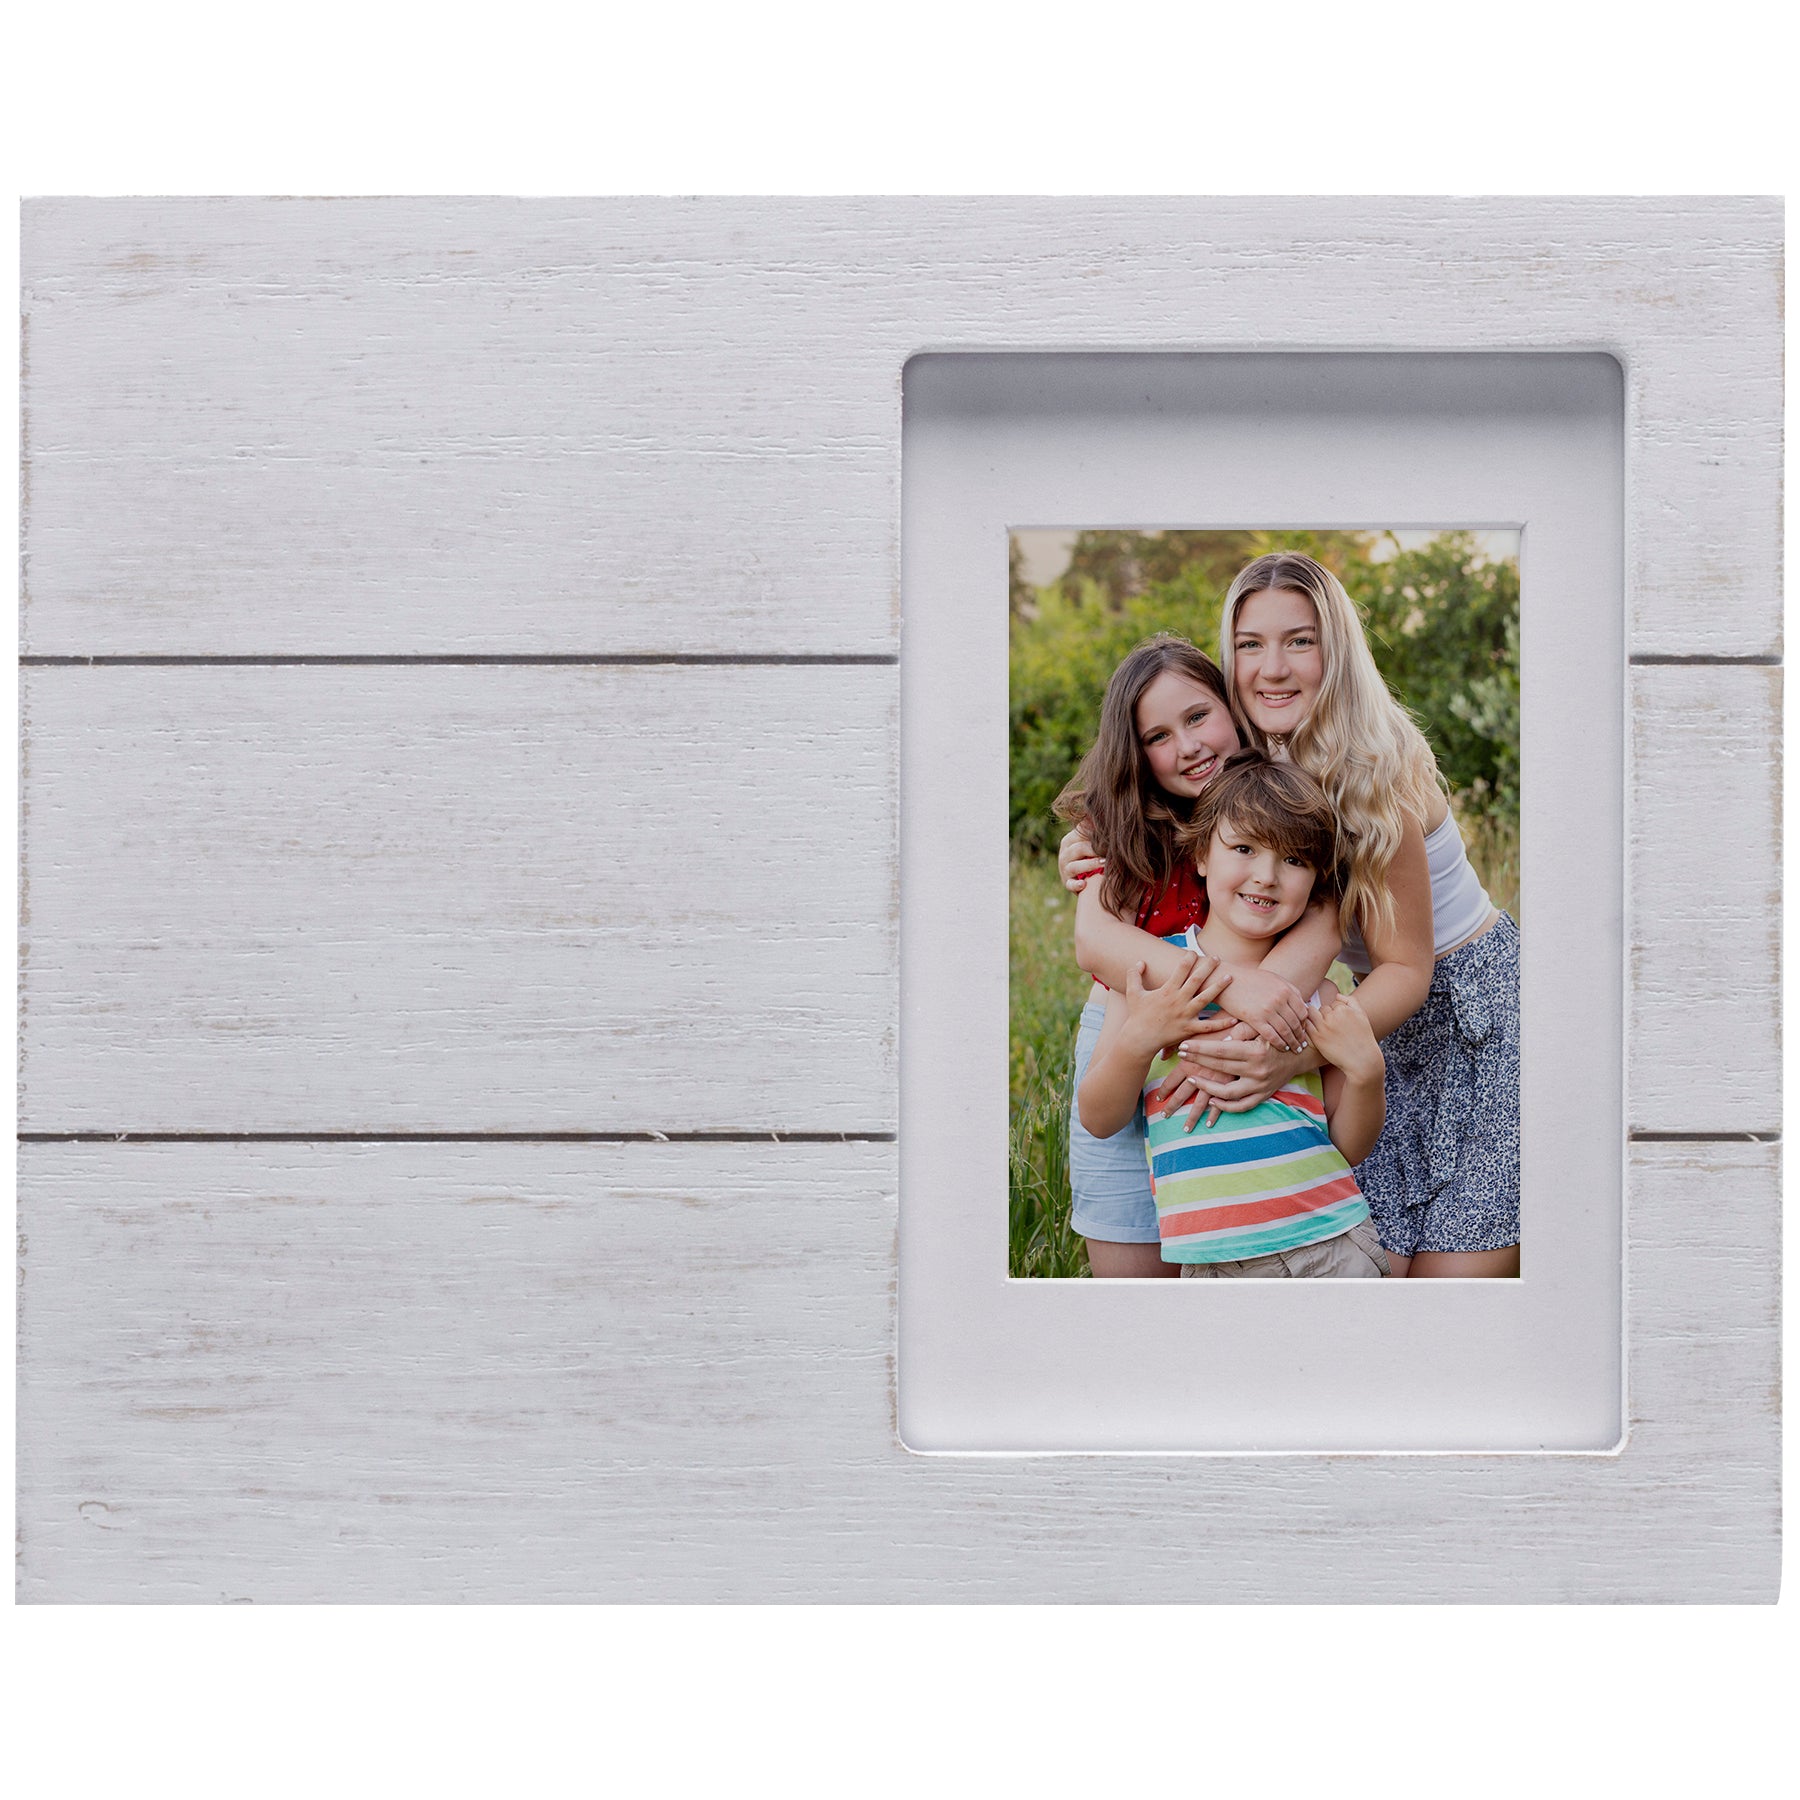 White Distressed Wood Vertical Picture Frame - 3.5x5 or 2.5x3.5 Photos